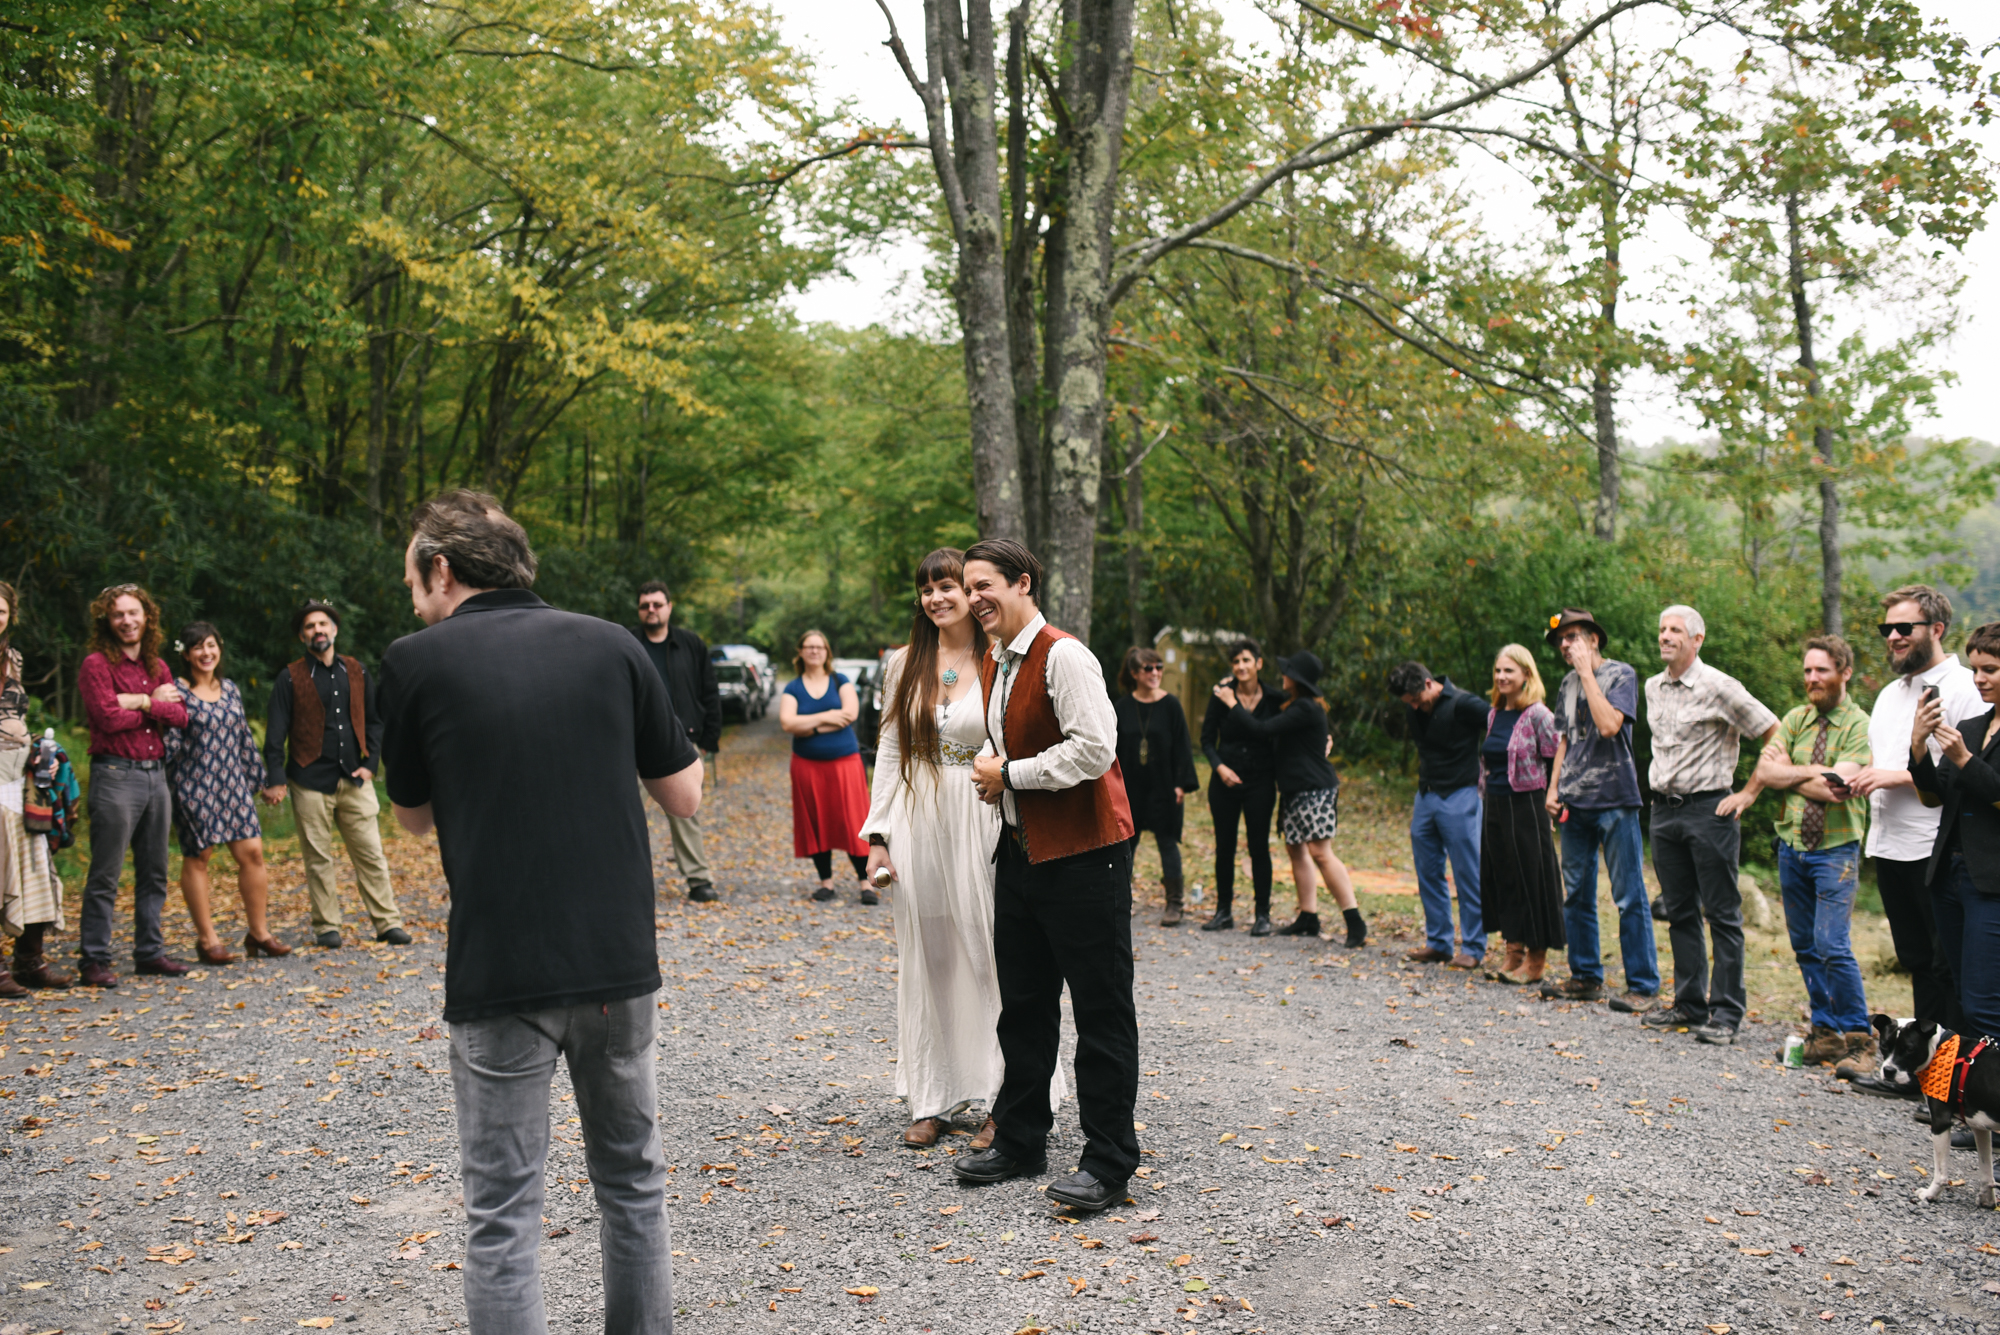  Mountain Wedding, Outdoors, Rustic, West Virginia, Maryland Wedding Photographer, DIY, Casual, Bride and groom laughing inside circle of friends and guests 